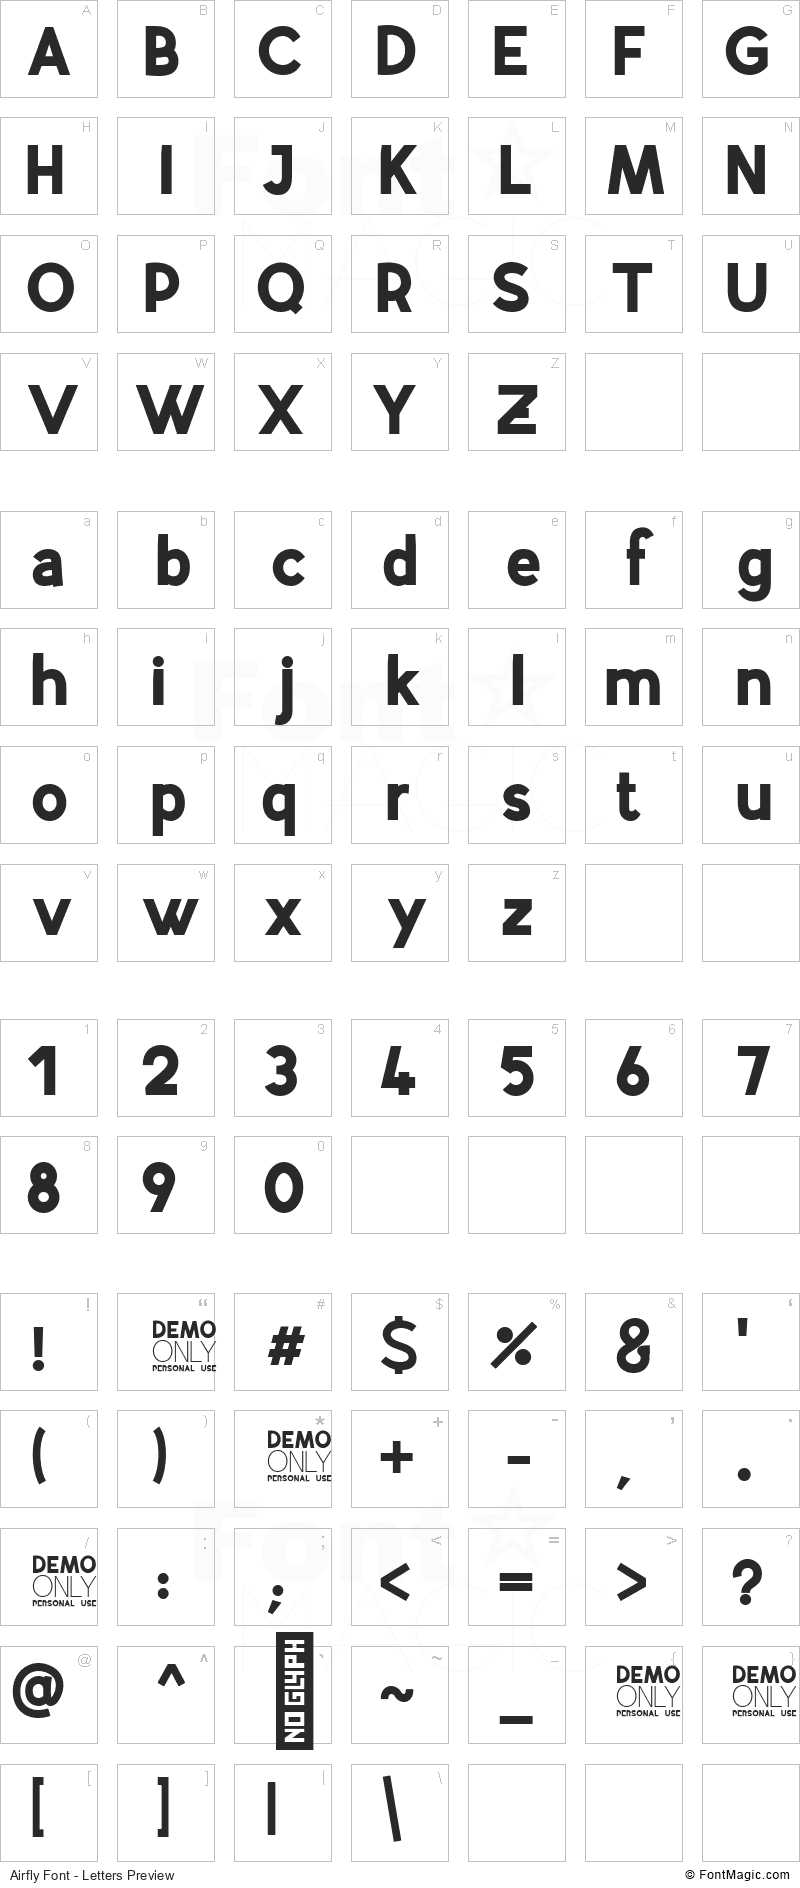 Airfly Font - All Latters Preview Chart